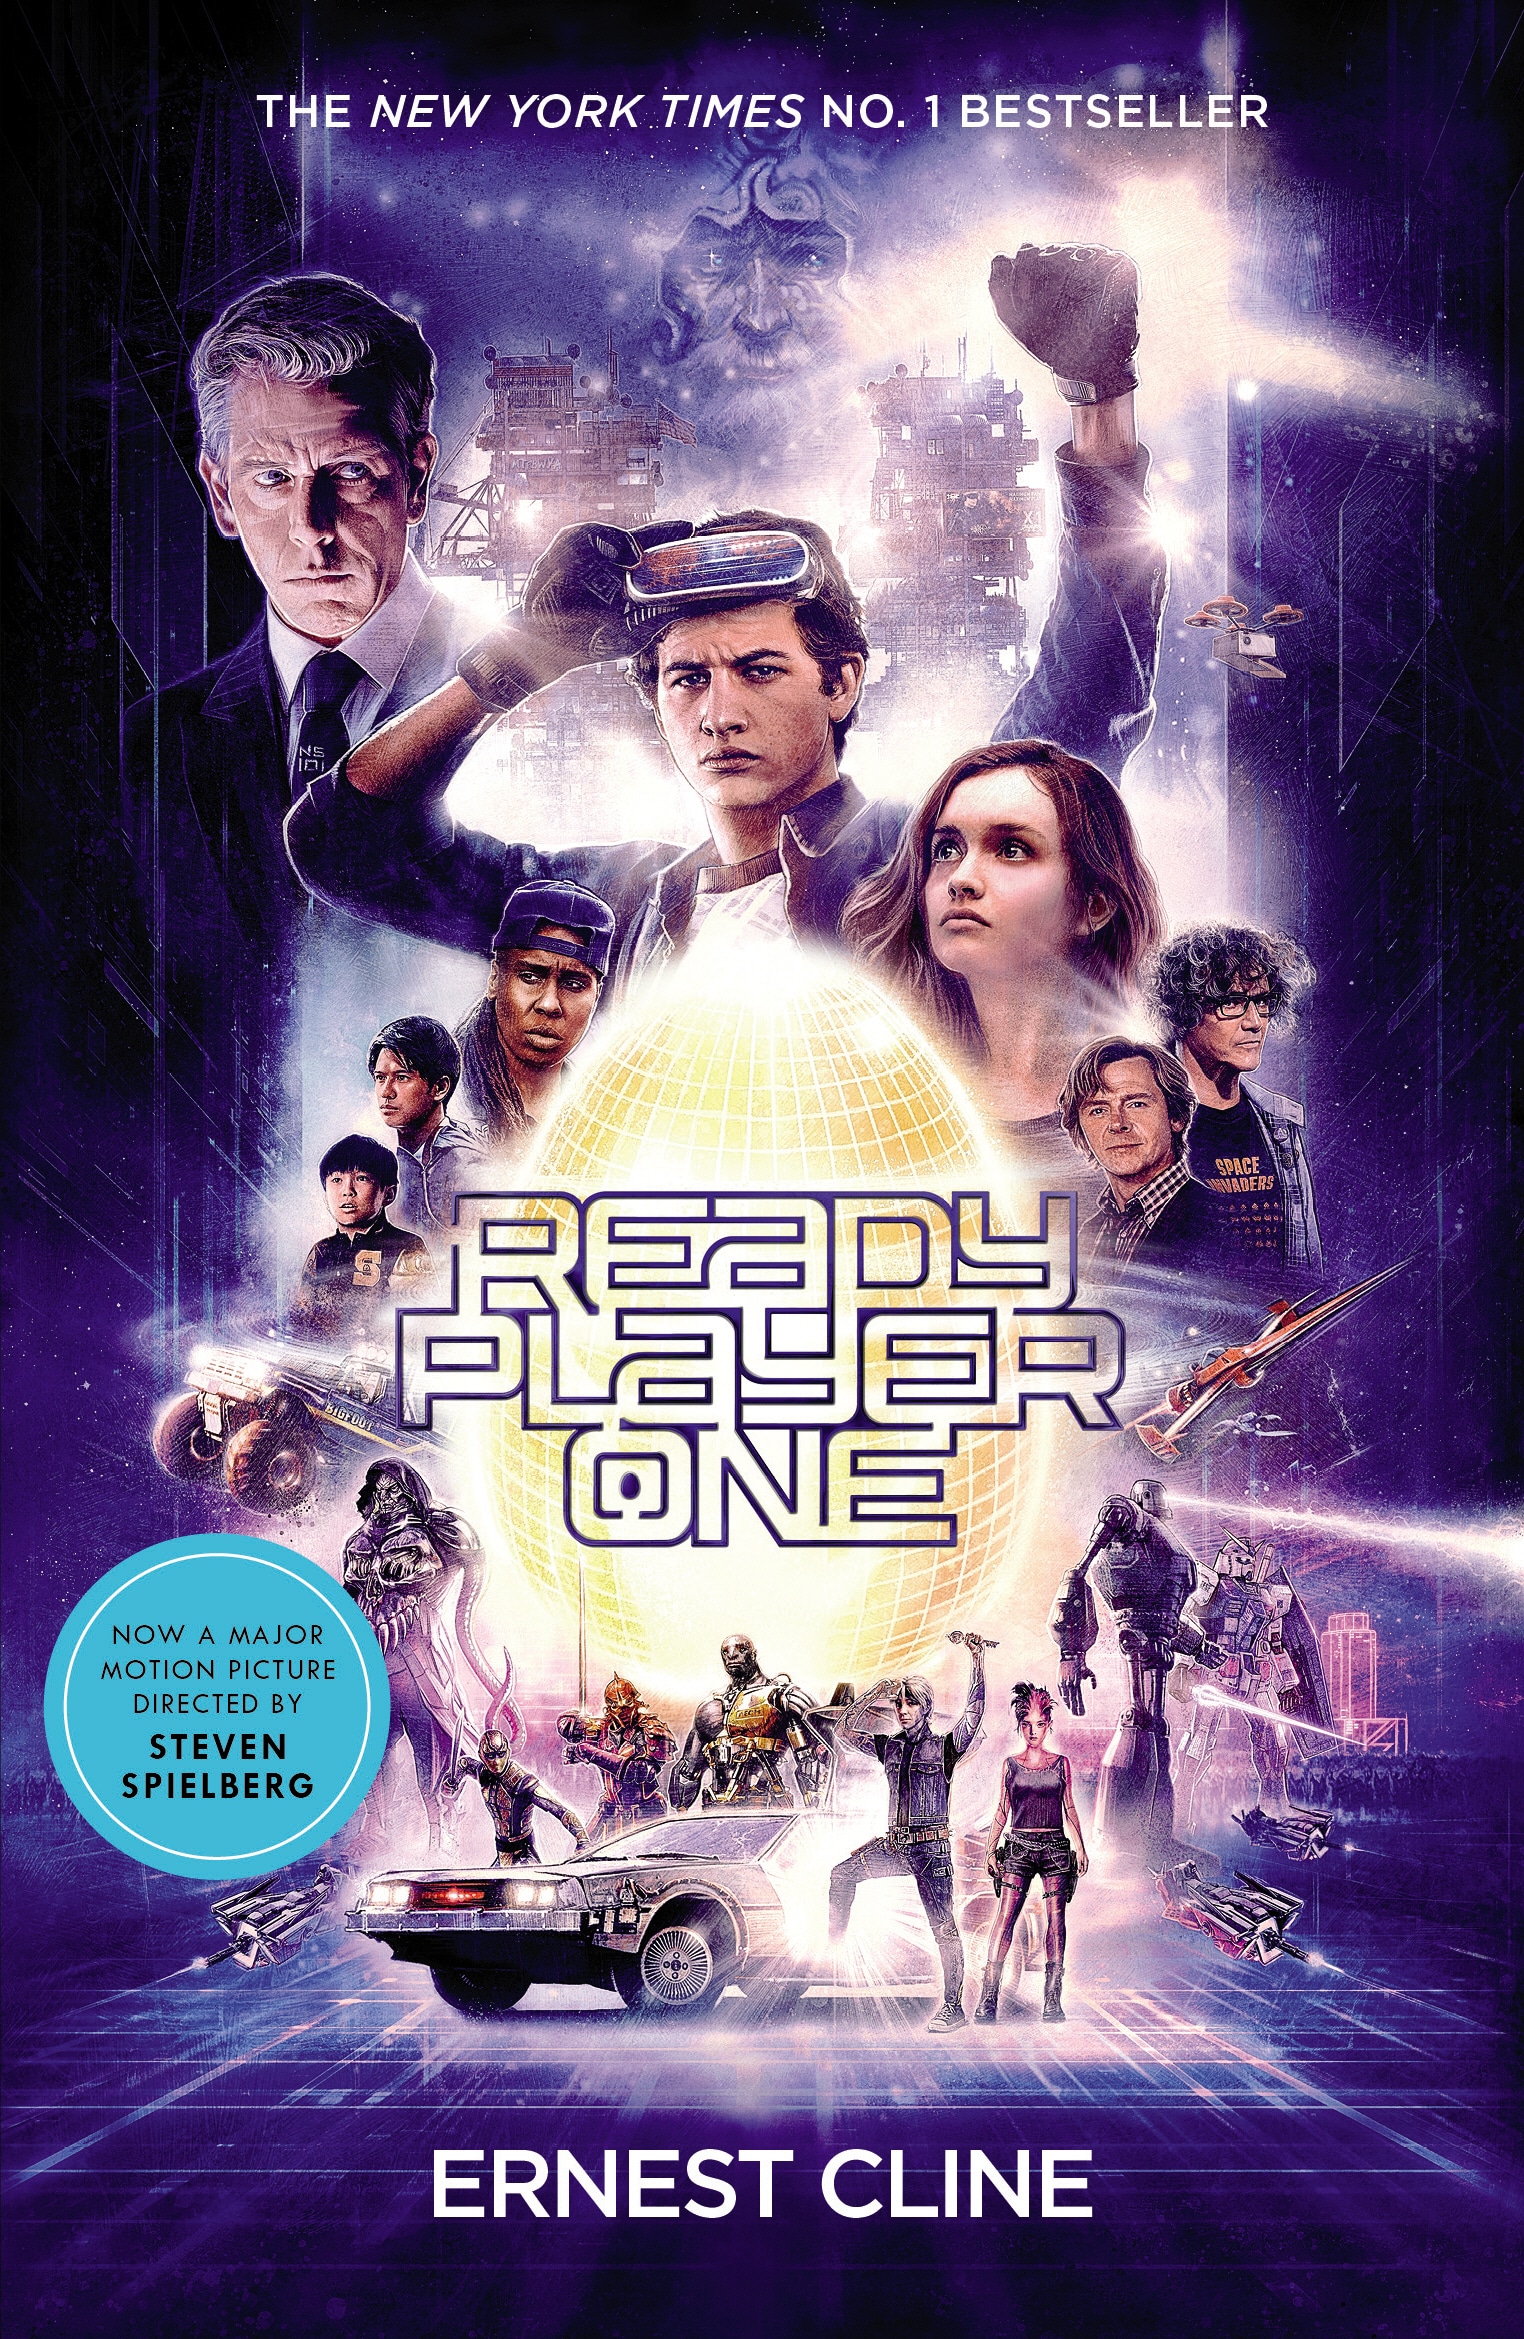 Book “Ready Player One” by Ernest Cline — January 30, 2018